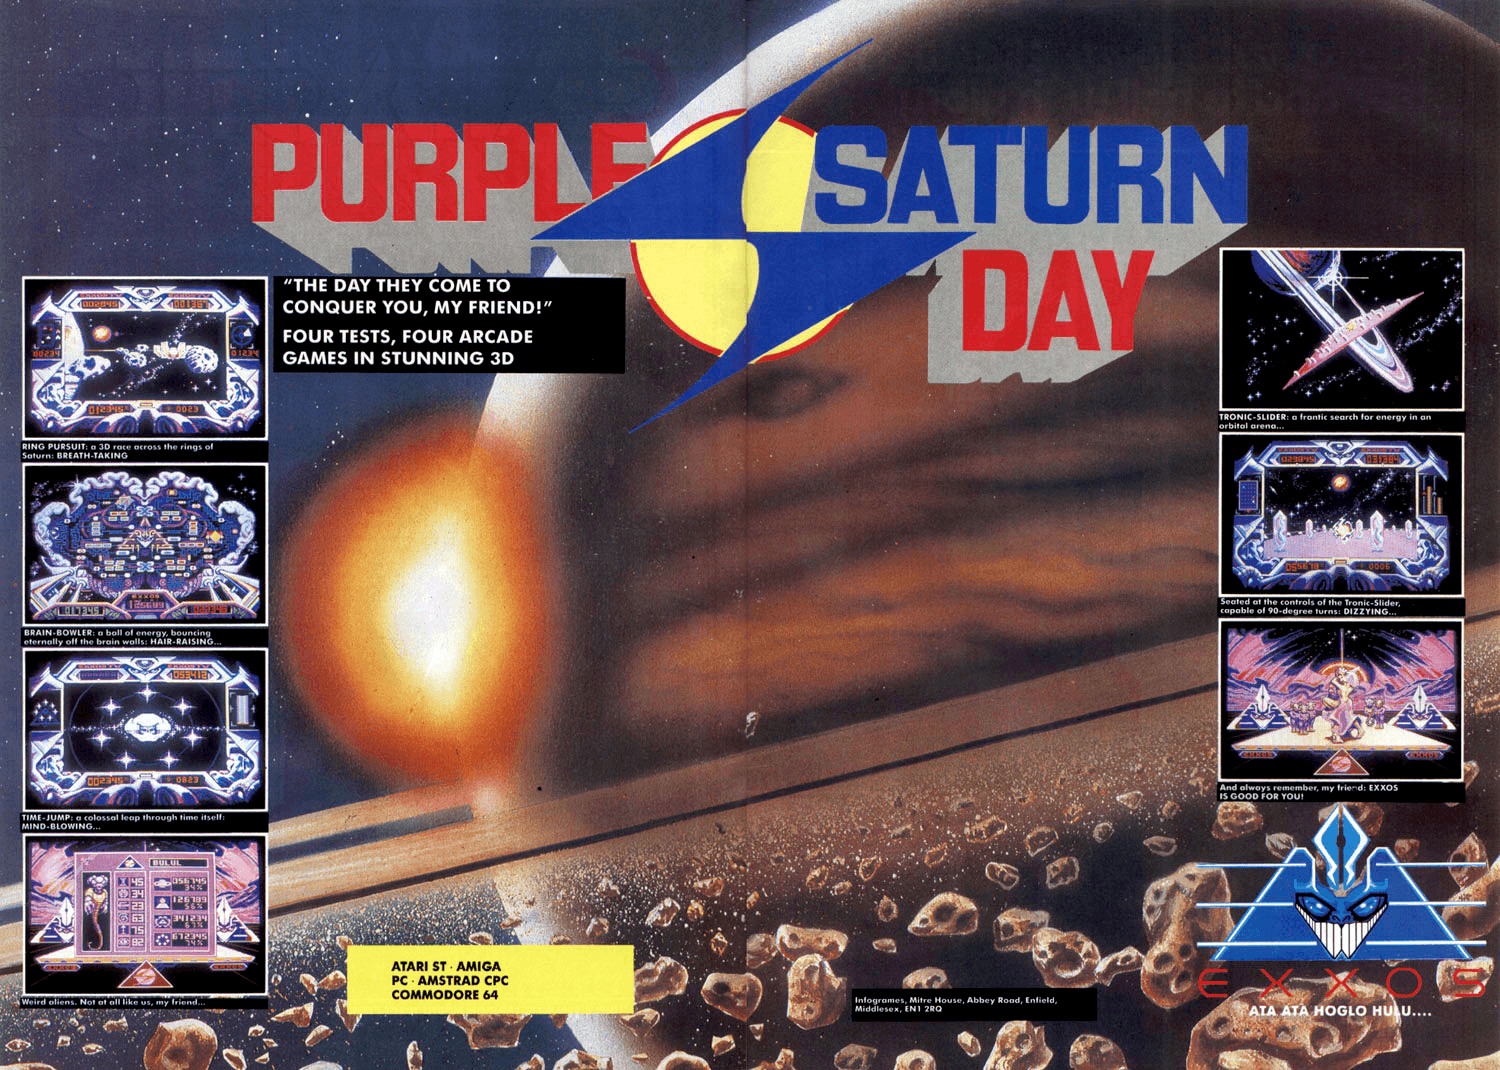 Image For Post | Every 4 galactic-years, alien athletes from every inhabited planet in the galaxy gather to compete in the Purple Saturn Day games. Four interplanetary events await the player: Pilot a ship through time and space, race around the rings of Saturn, solve a fast-moving electronic puzzle and navigate a futuristic obstacle course.

Although not an official entry in the series, this game is in the same vein as Epyx's popular Games "series" titles.